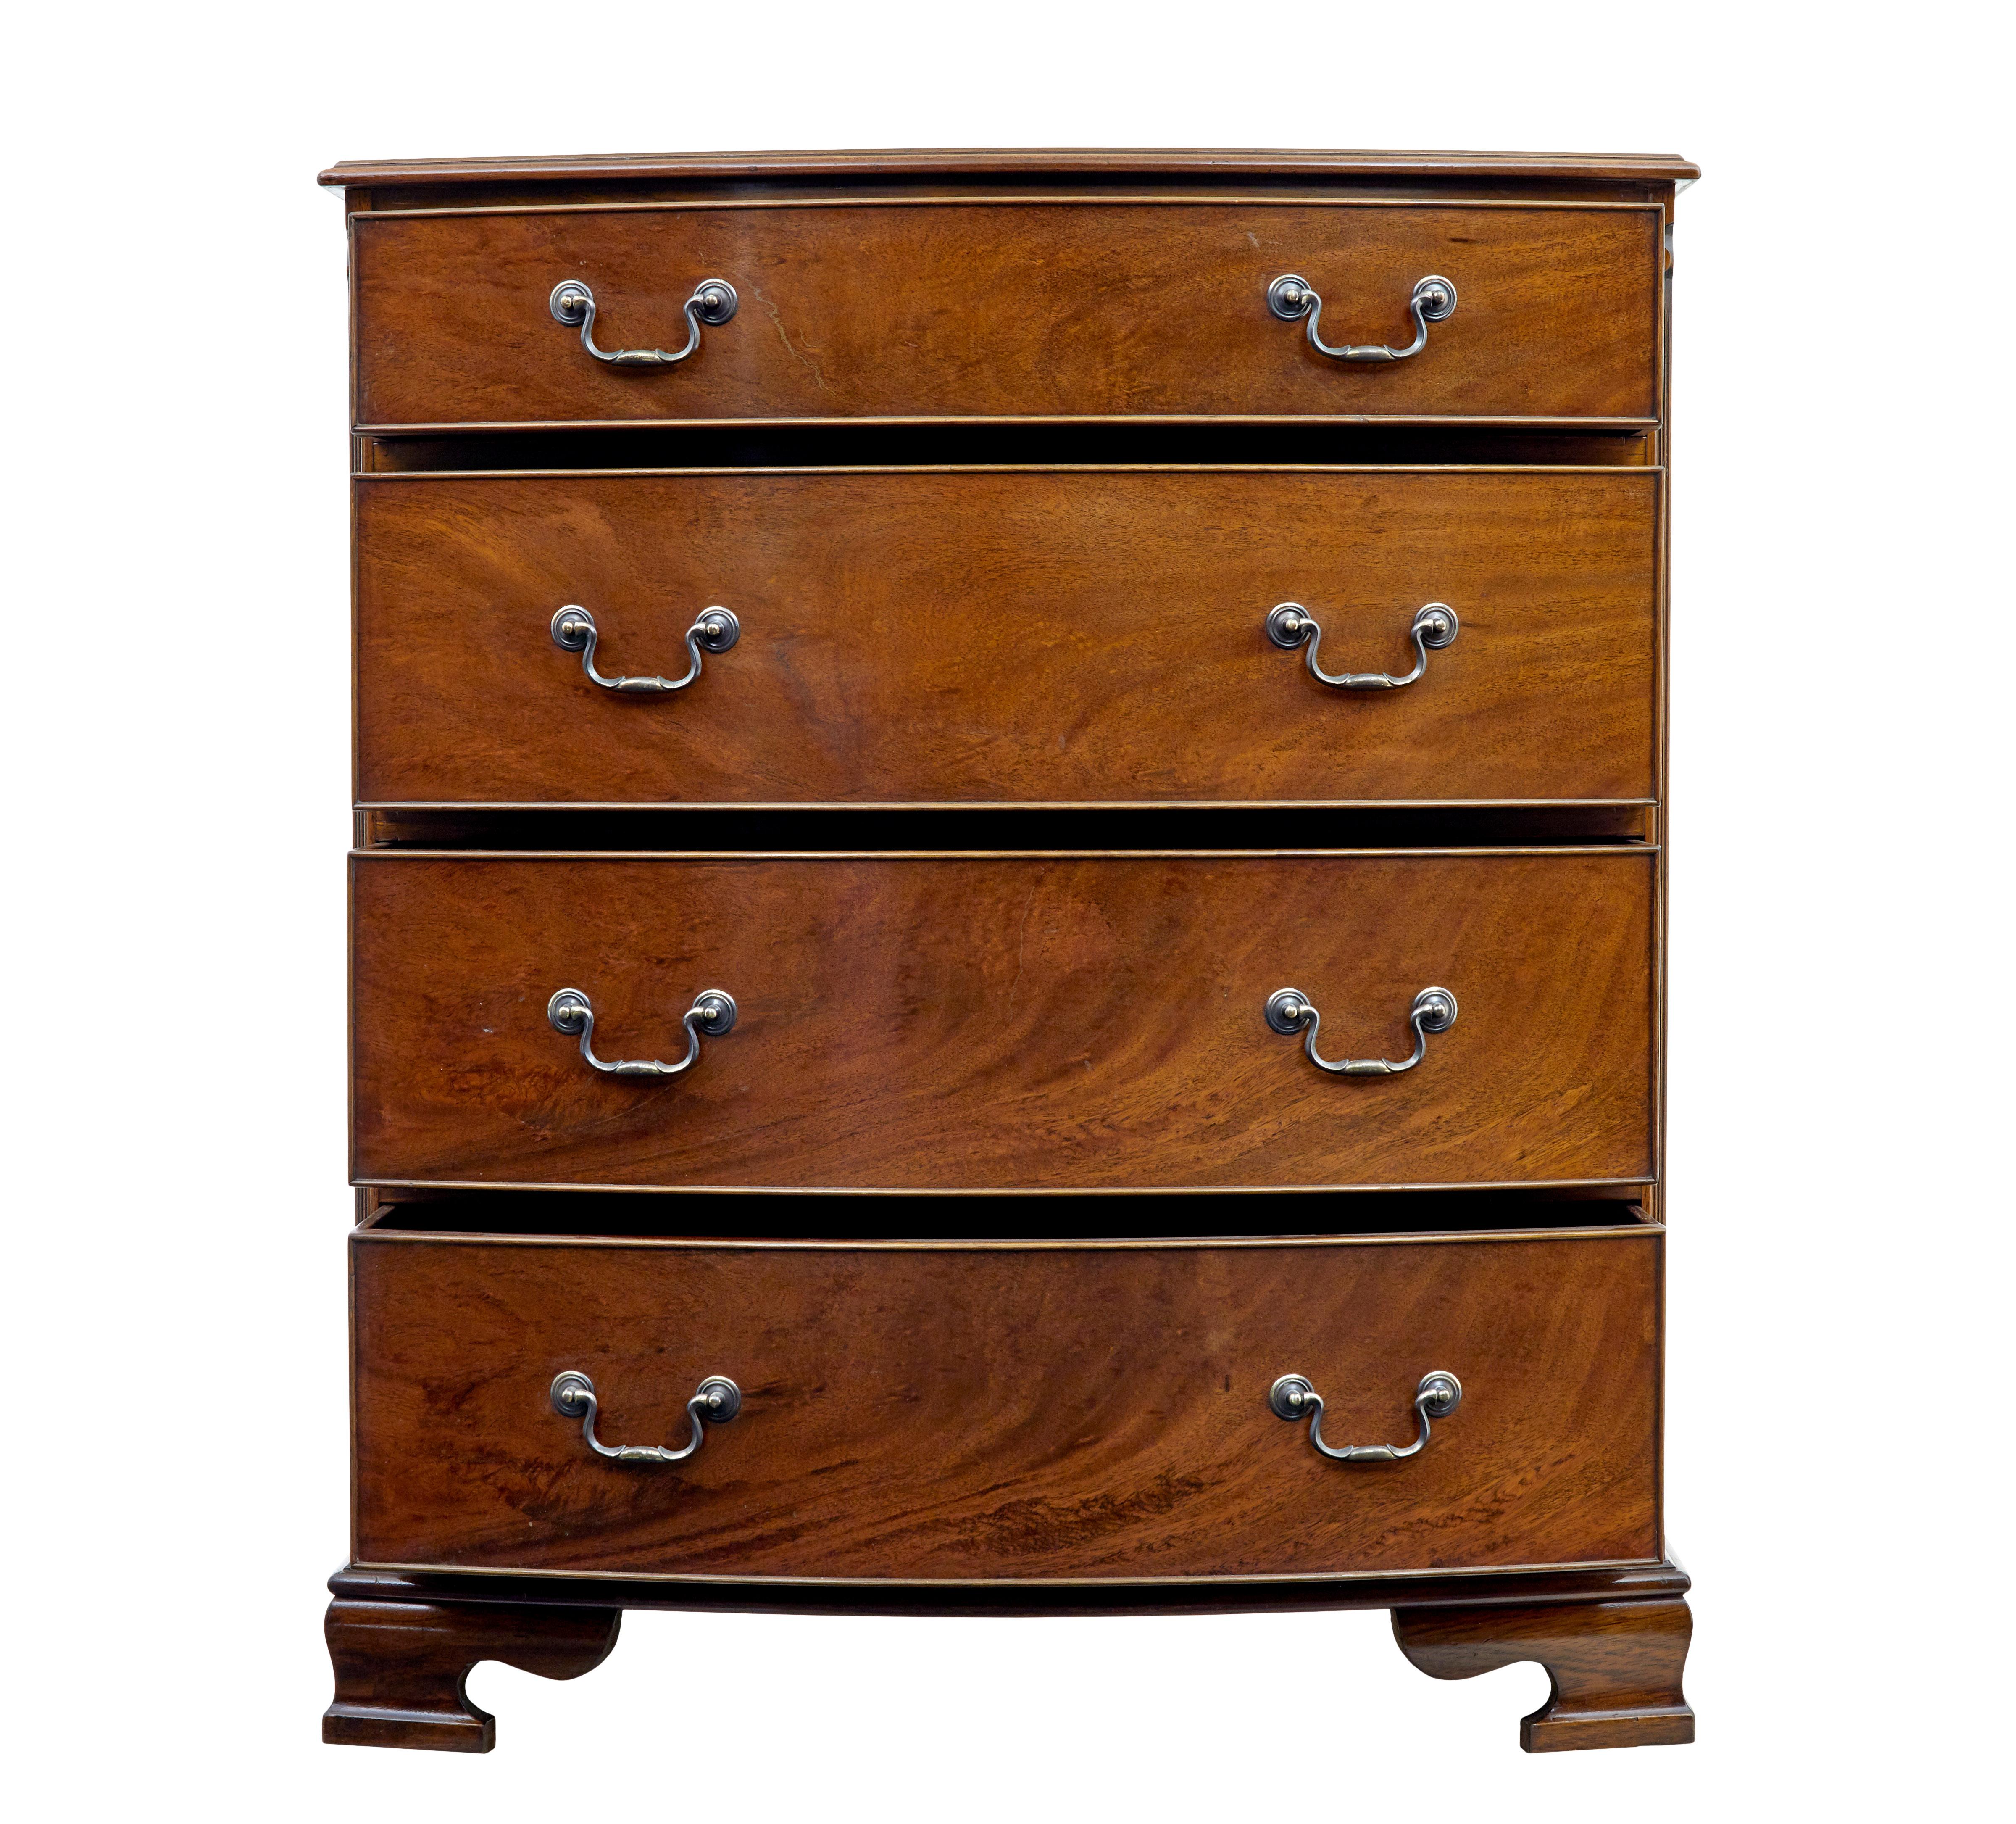 Georgian 20th century bowfront mahogany chest of drawers by Adam Richwood For Sale